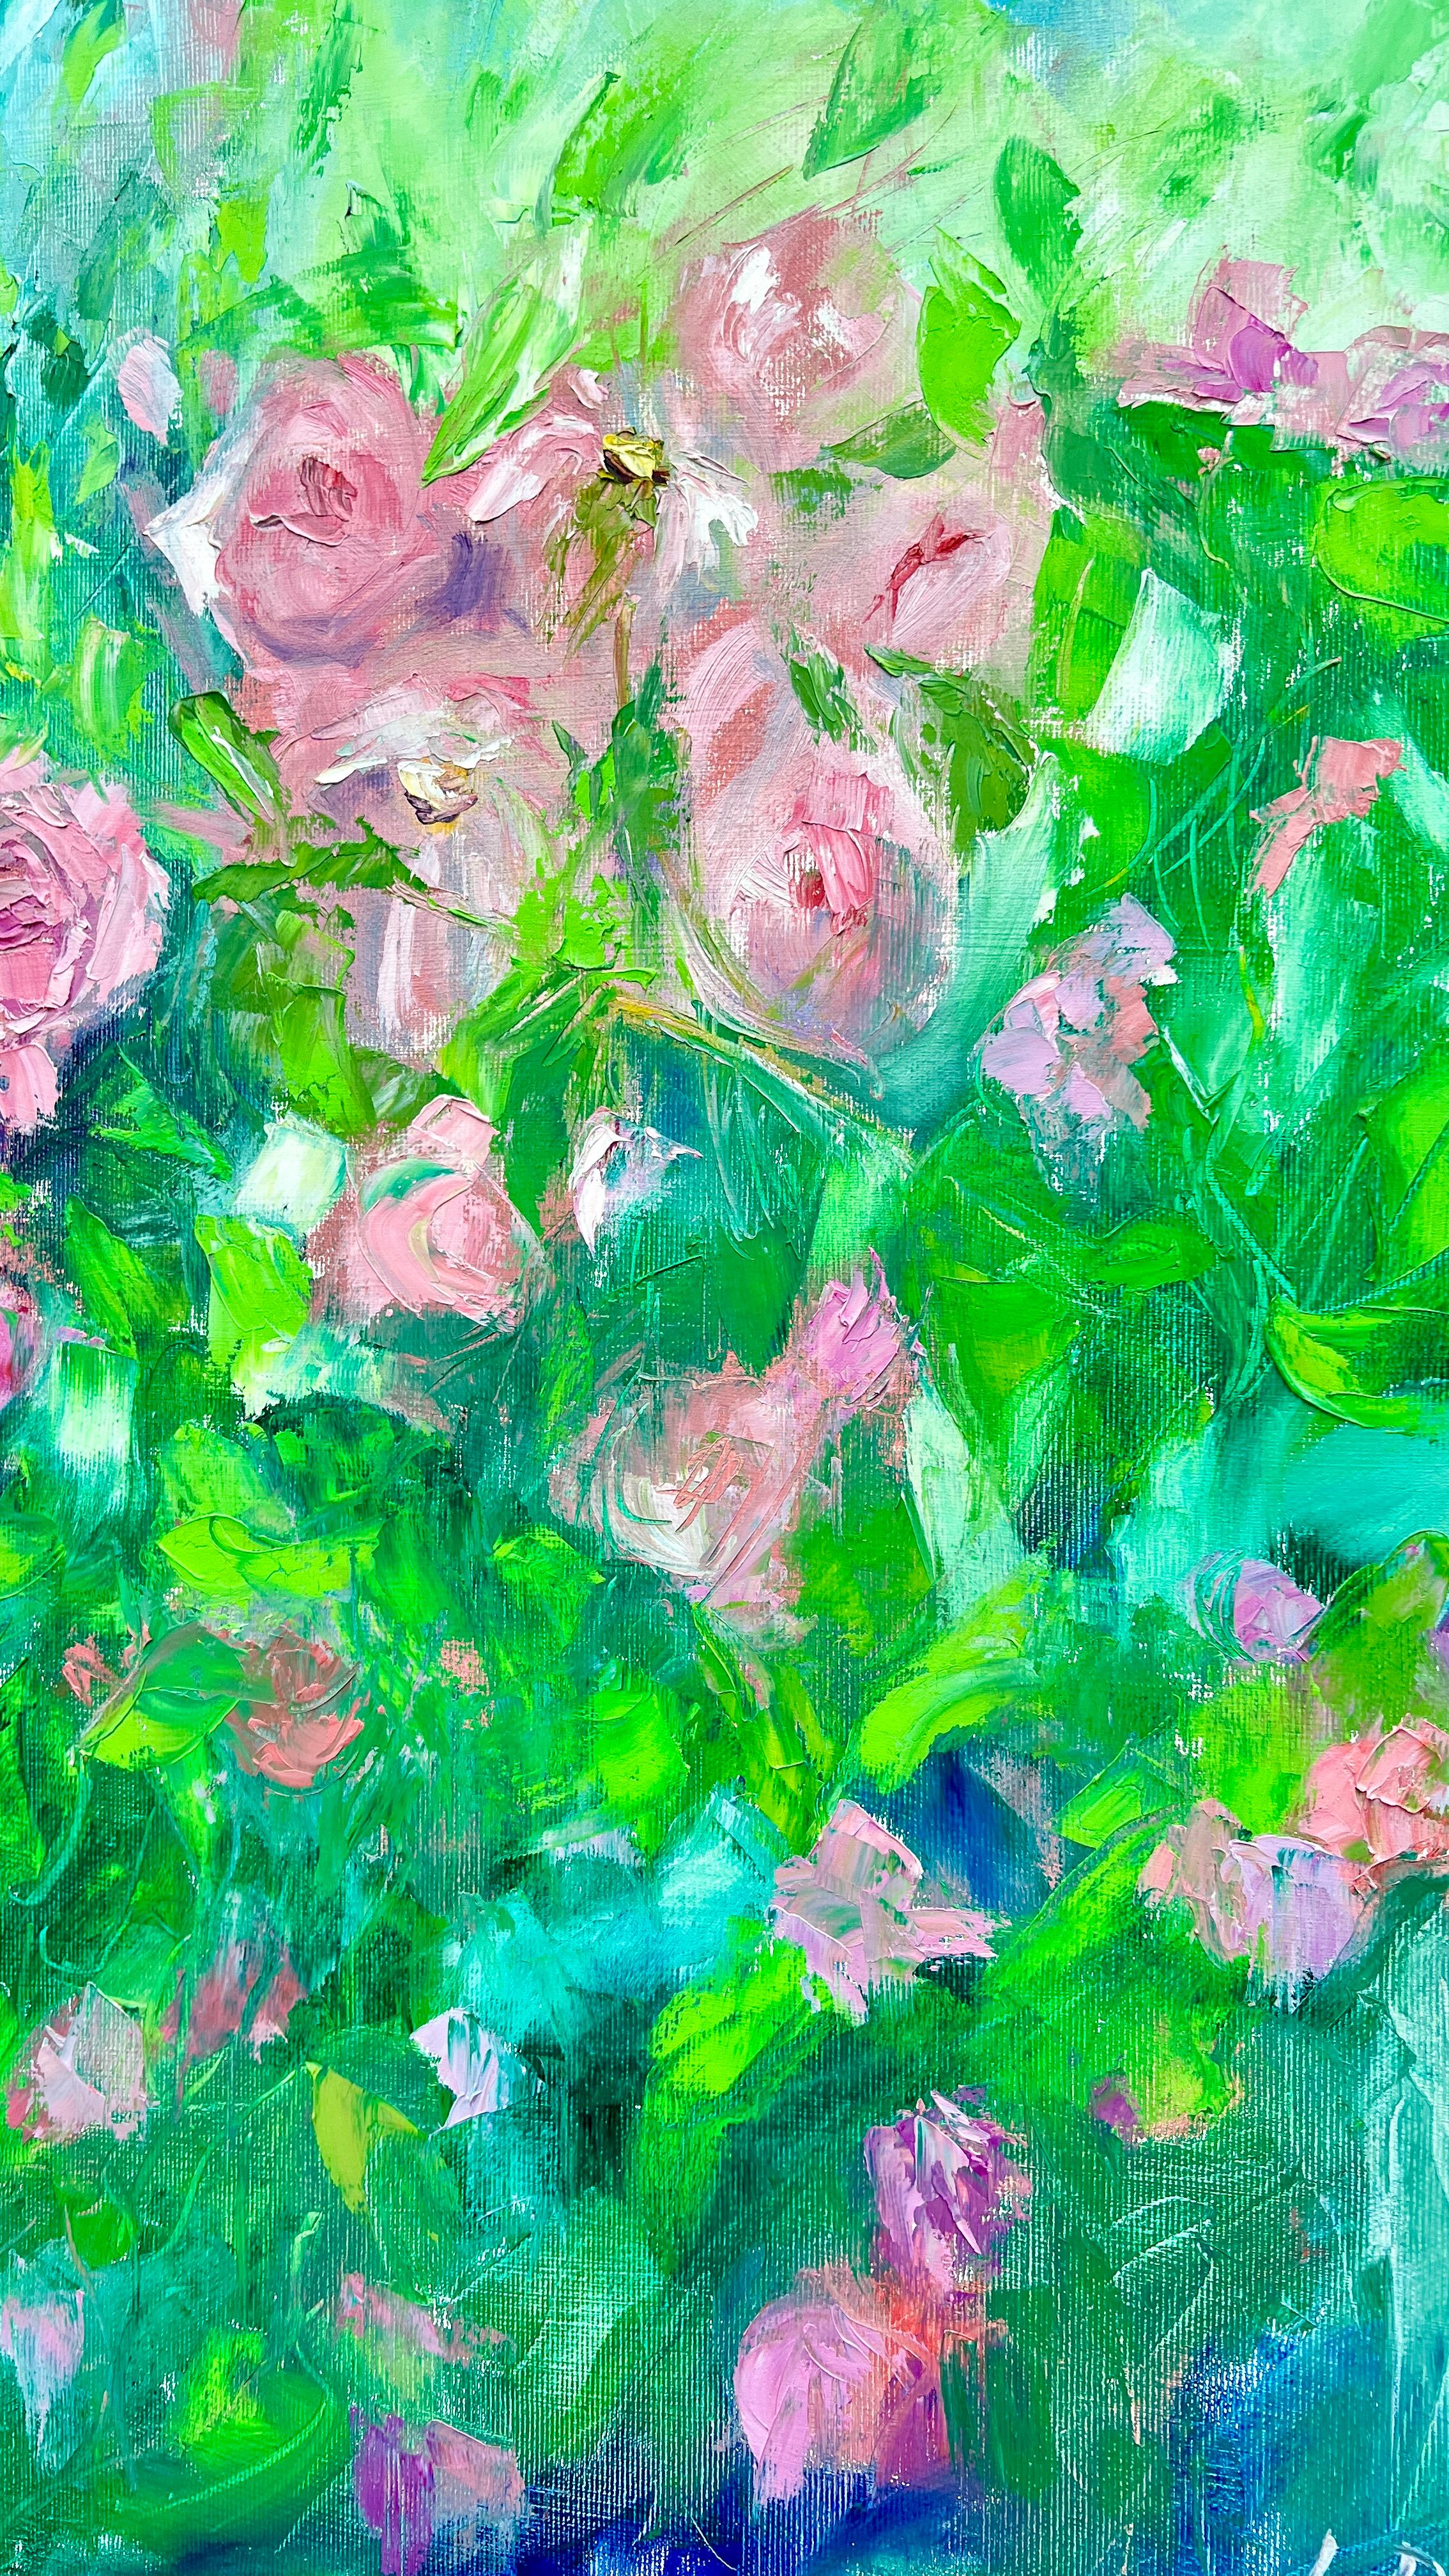 Rosy song
70 x 70 cm
28 x 28 inches
Expressive and impressive floral painting of charming roses. 
This artwork was made using a palette knife on premium cotton canvas of professional quality, wrapped around of wooden frame.  
The artwork was